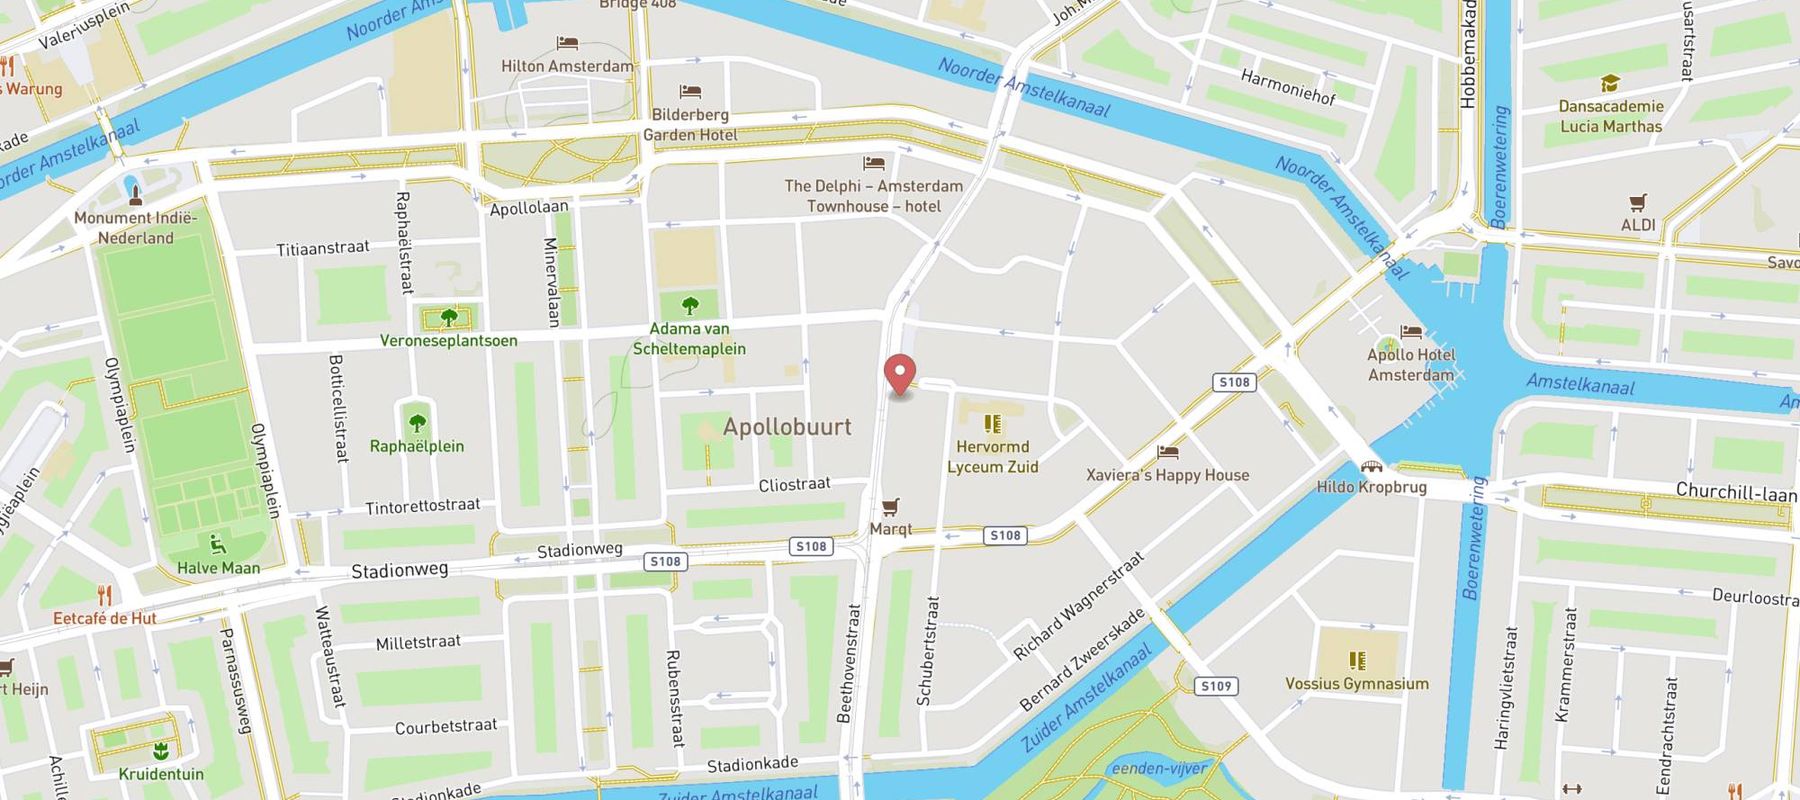 Hotel Beethoven Amsterdam map